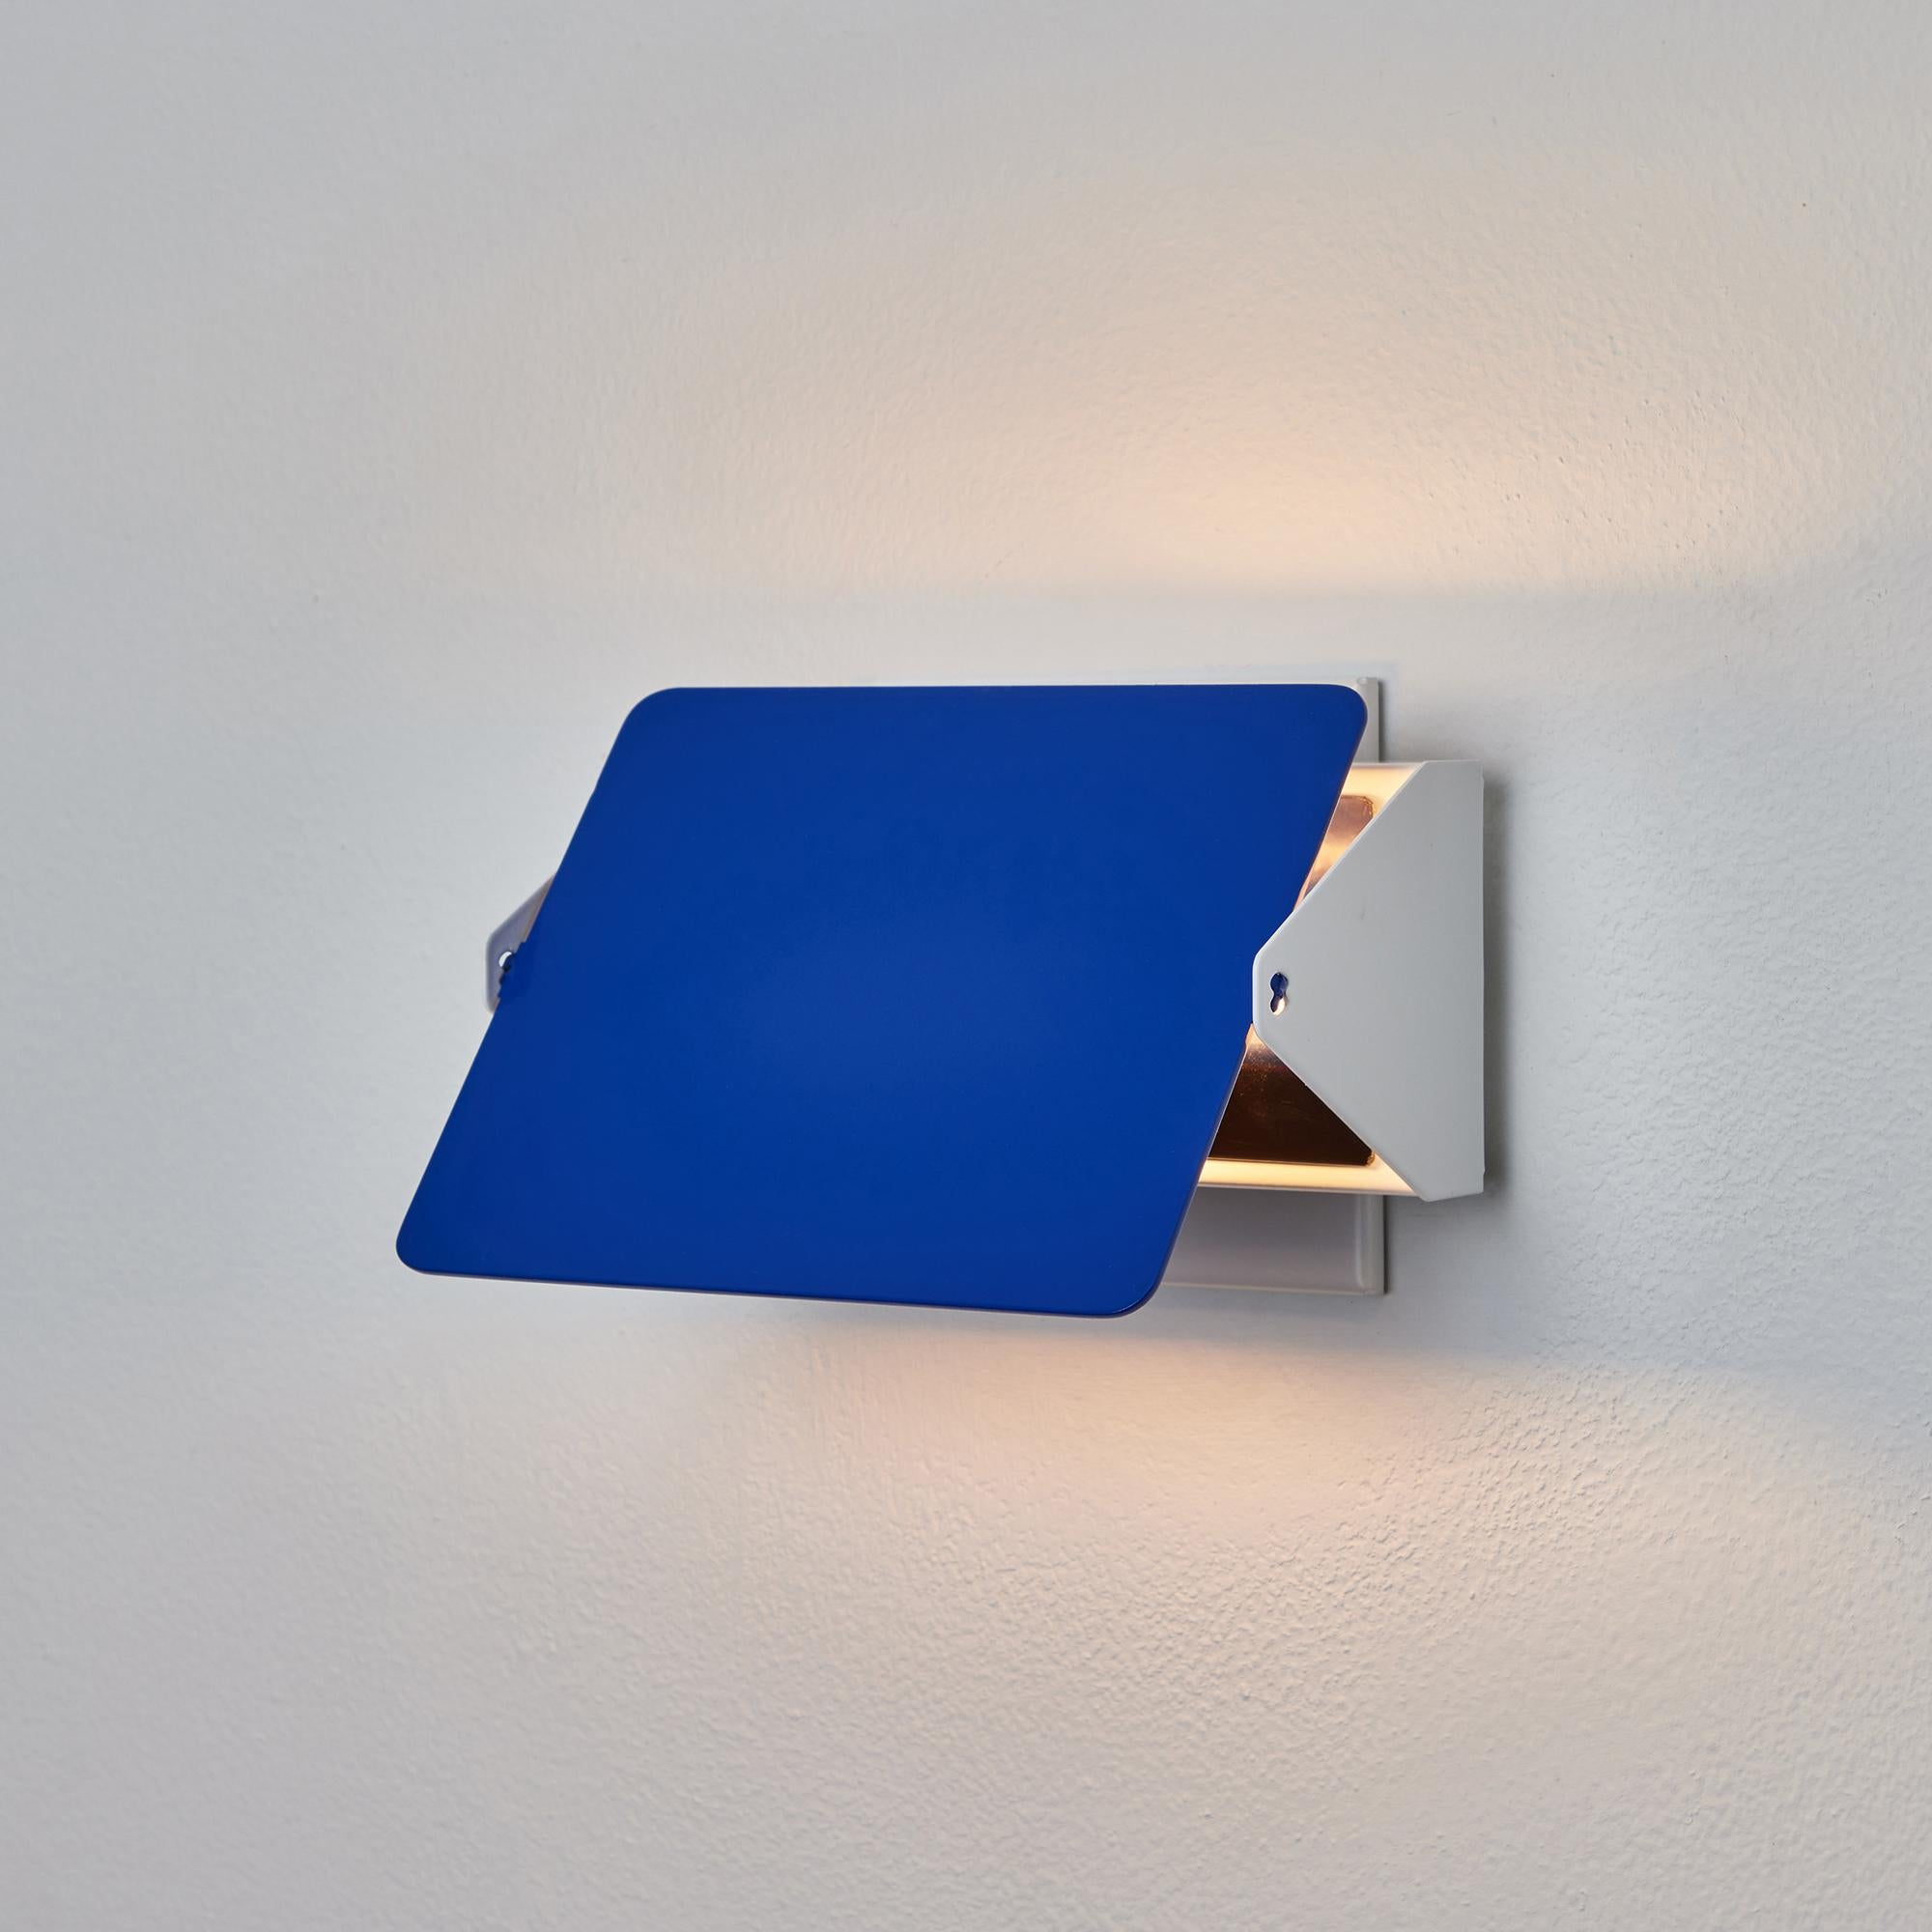 Anodized Charlotte Perriand 'Applique à Volet Pivotant' Wall Light in Blue for Nemo For Sale